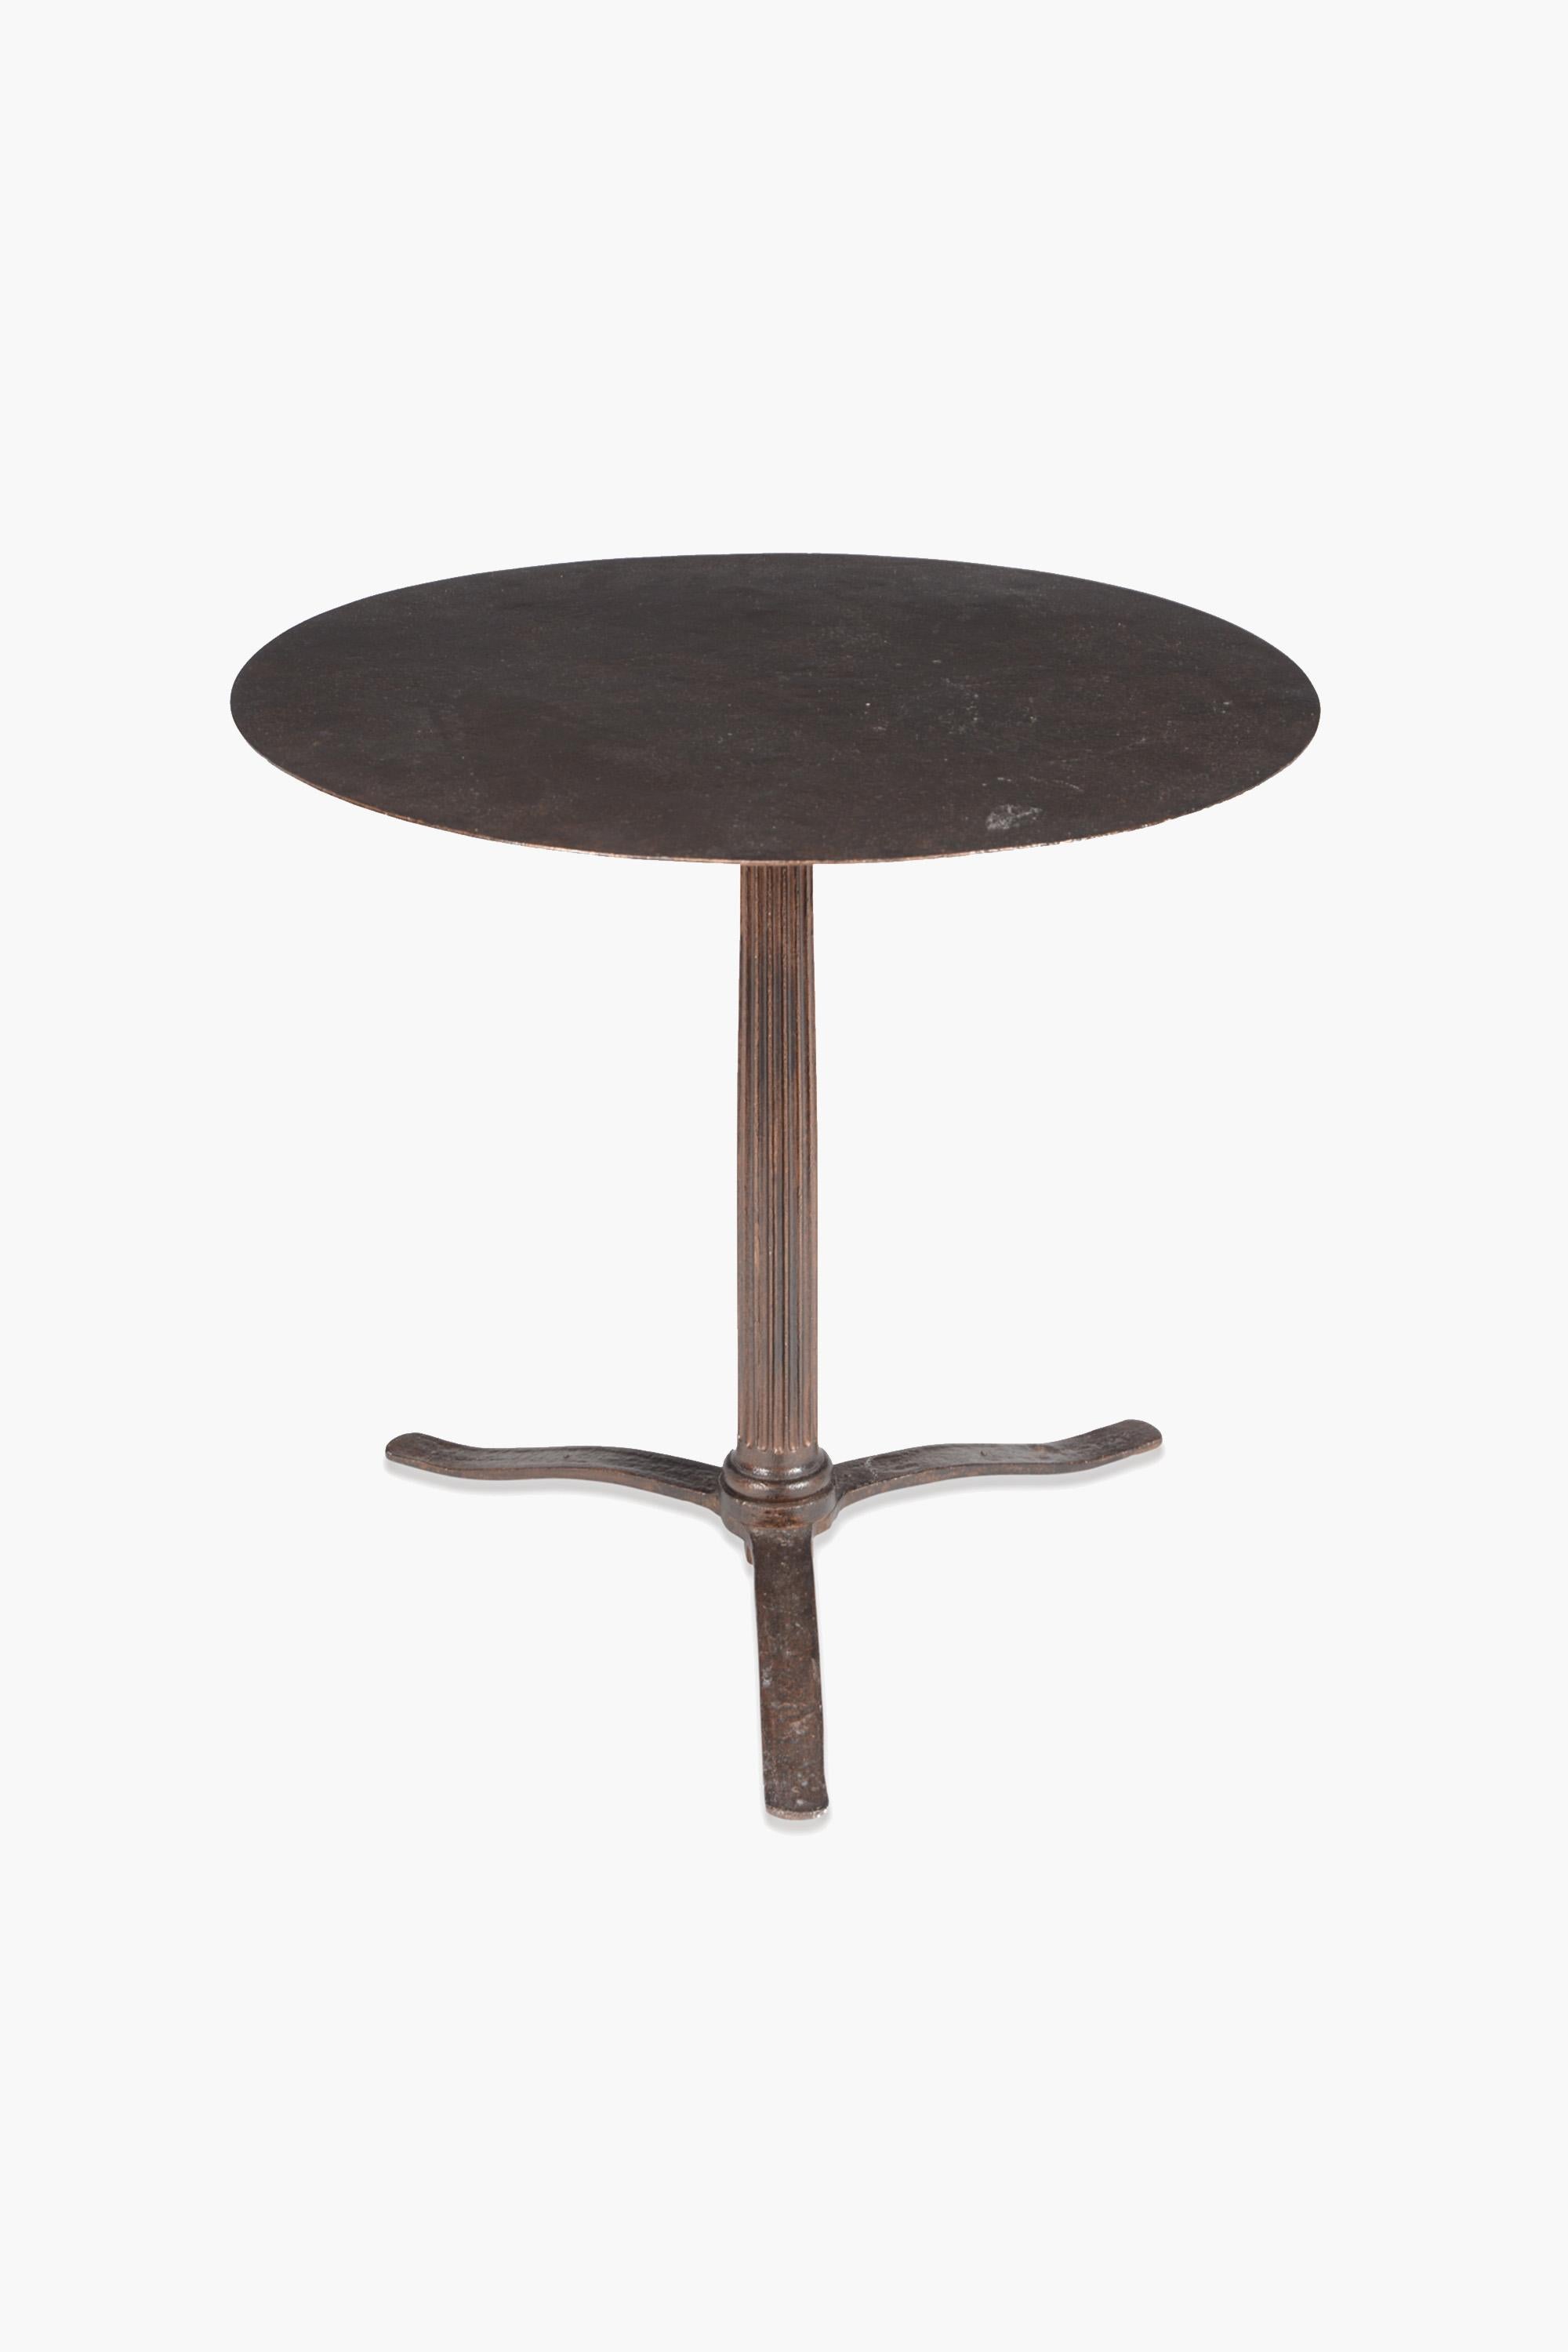 Cast iron table, 19th century

A late 19th Century cast-iron table in the manner of a George III centre table.

The circular top above a fluted column support and three outswept flat legs.

Recently restored ironwork. Could be fitted with a